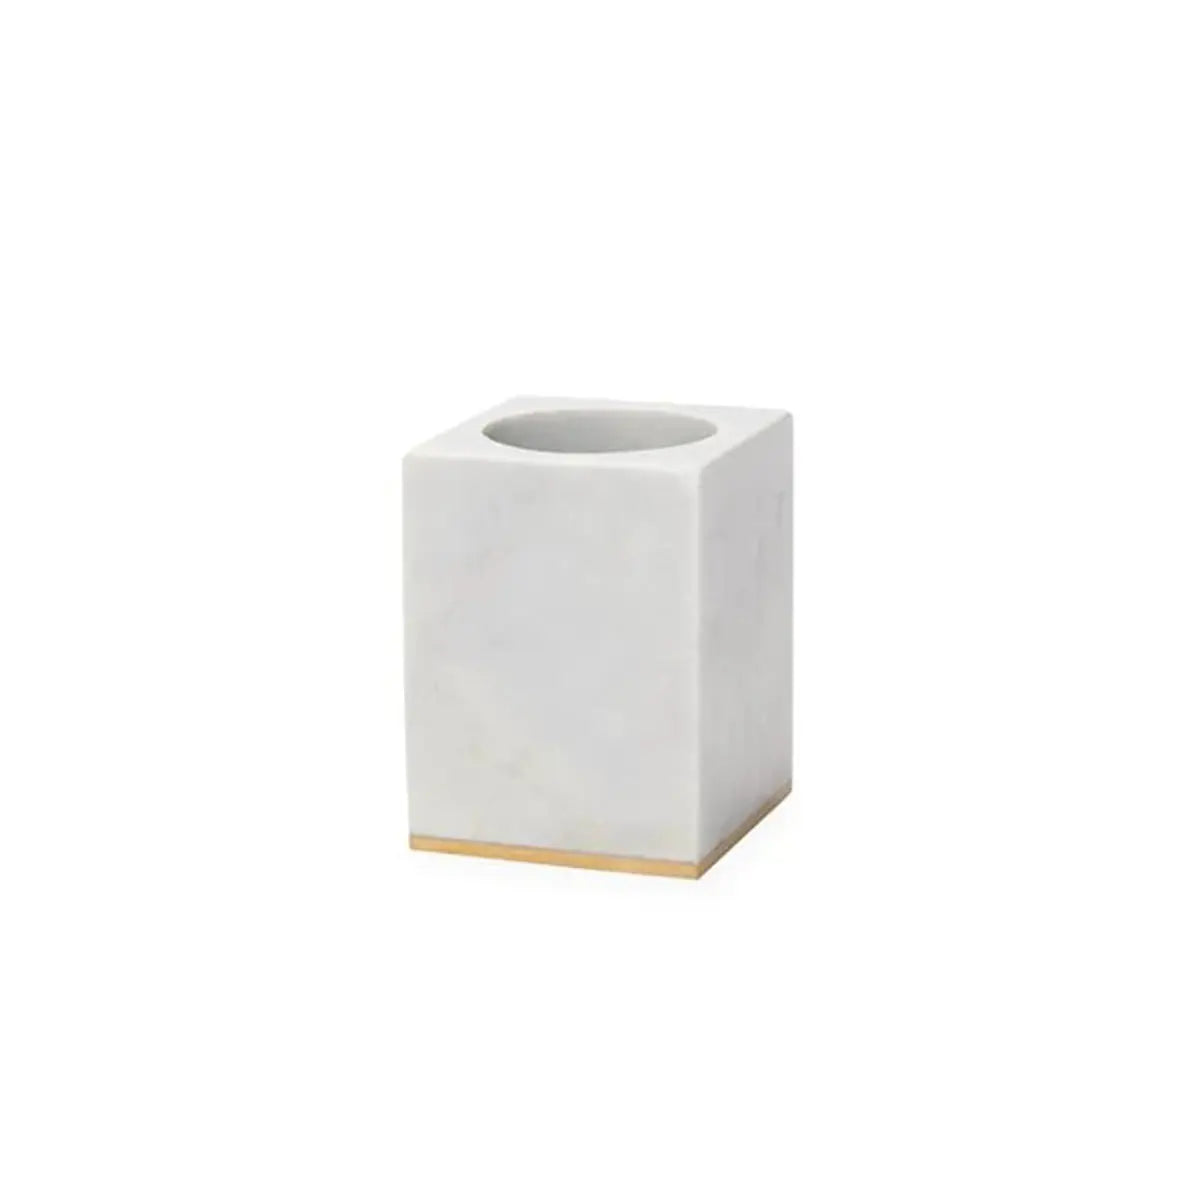 Sferra Pietra Marble Toothbrush Holder in White, Gold